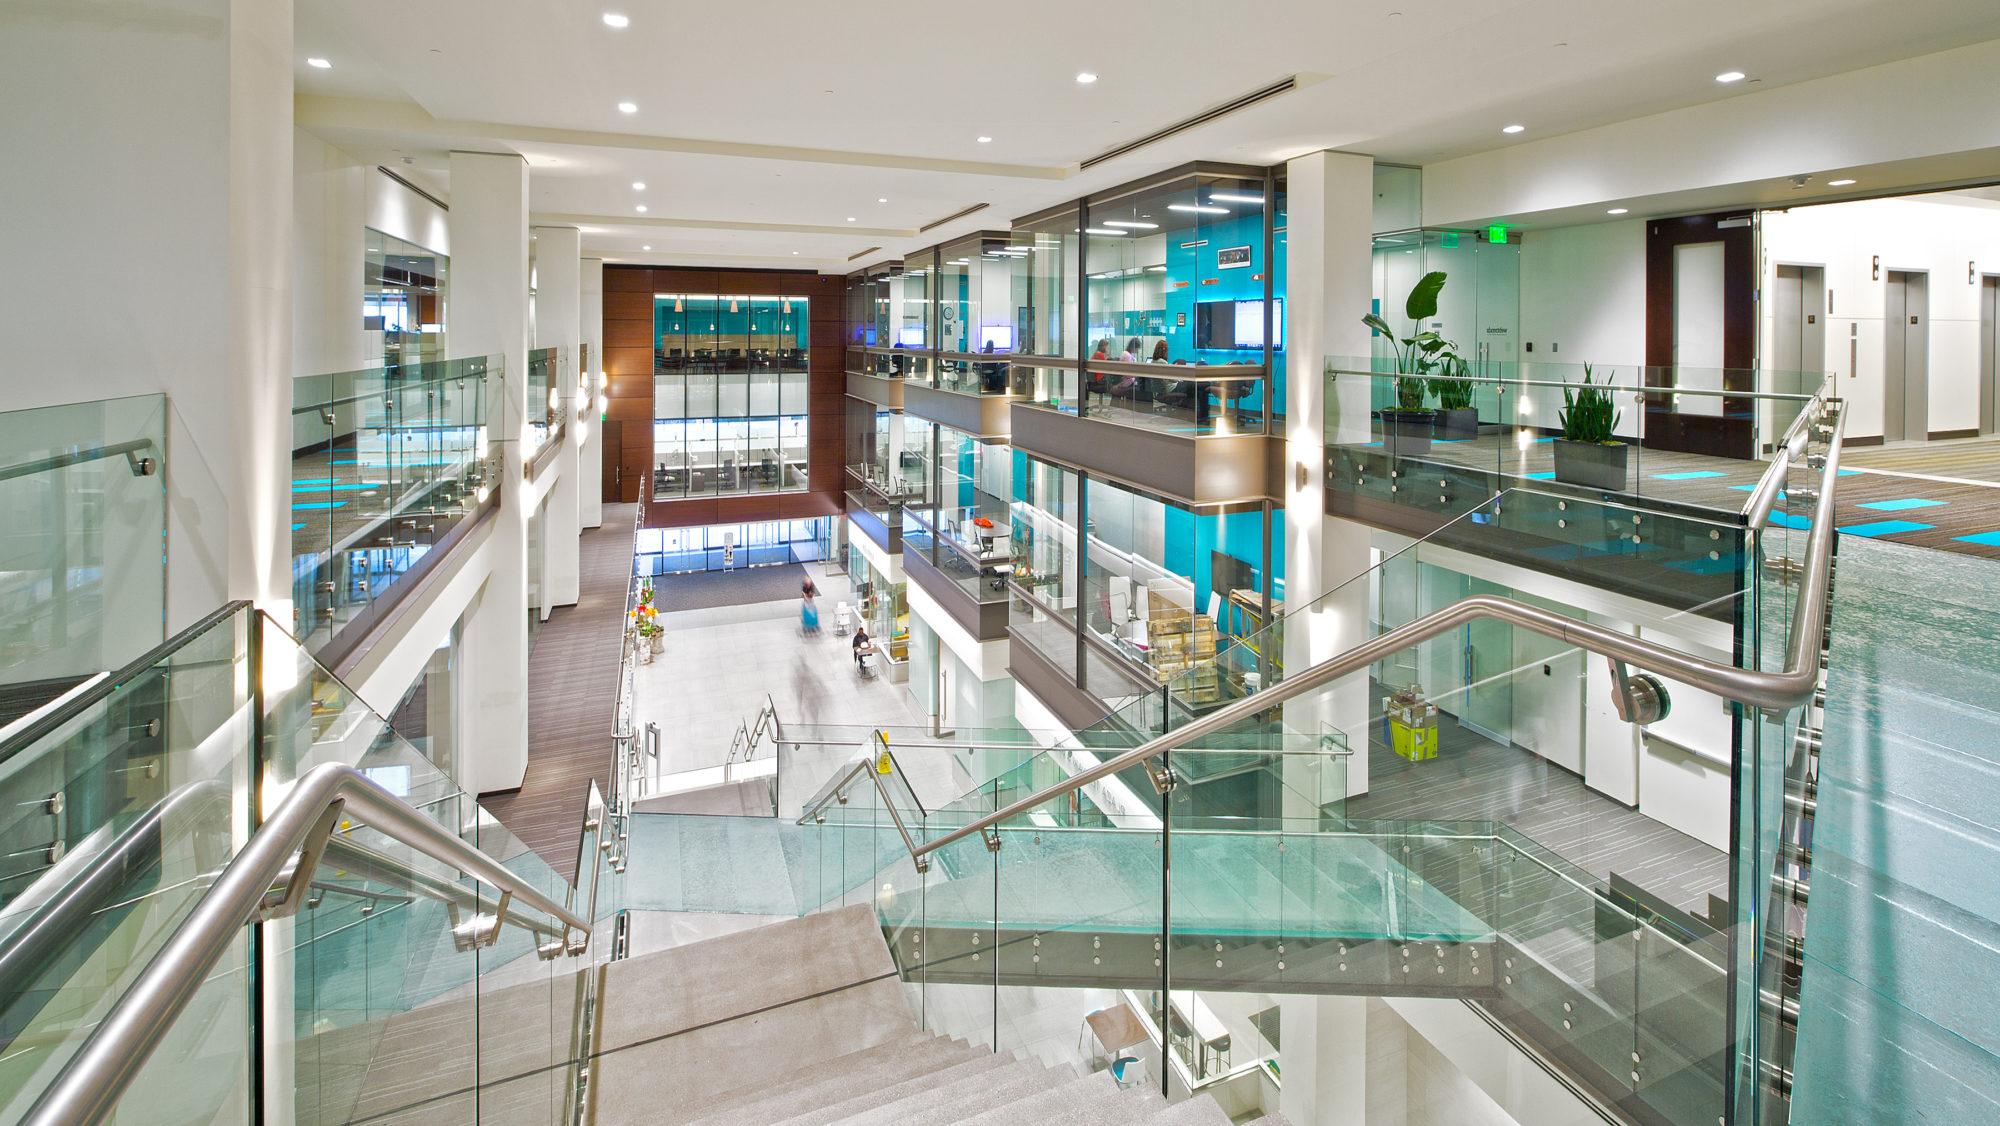 Interior of US Bancorp塔 with modern glass and wood finishes.